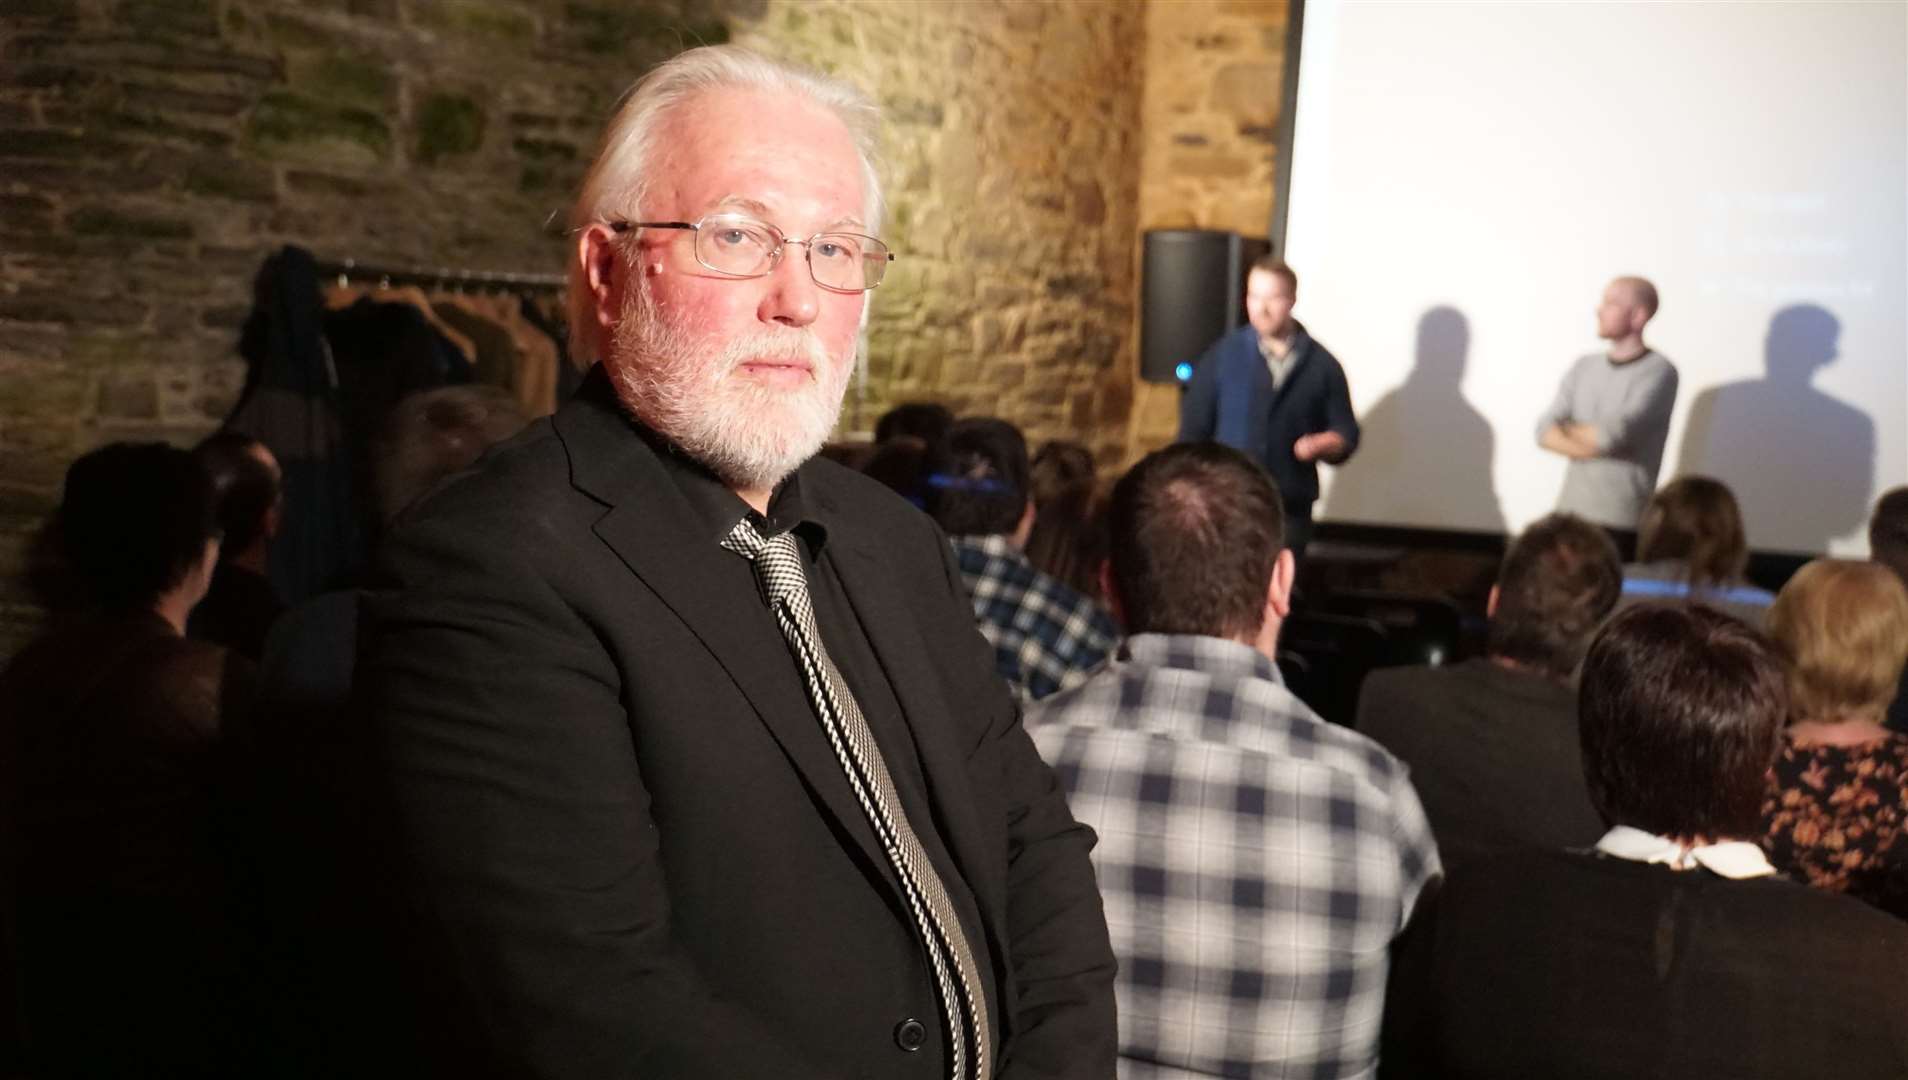 Murray Watts is an award-winning filmmaker himself and hosted the event for his sons Ffion and Toby seen in the background.